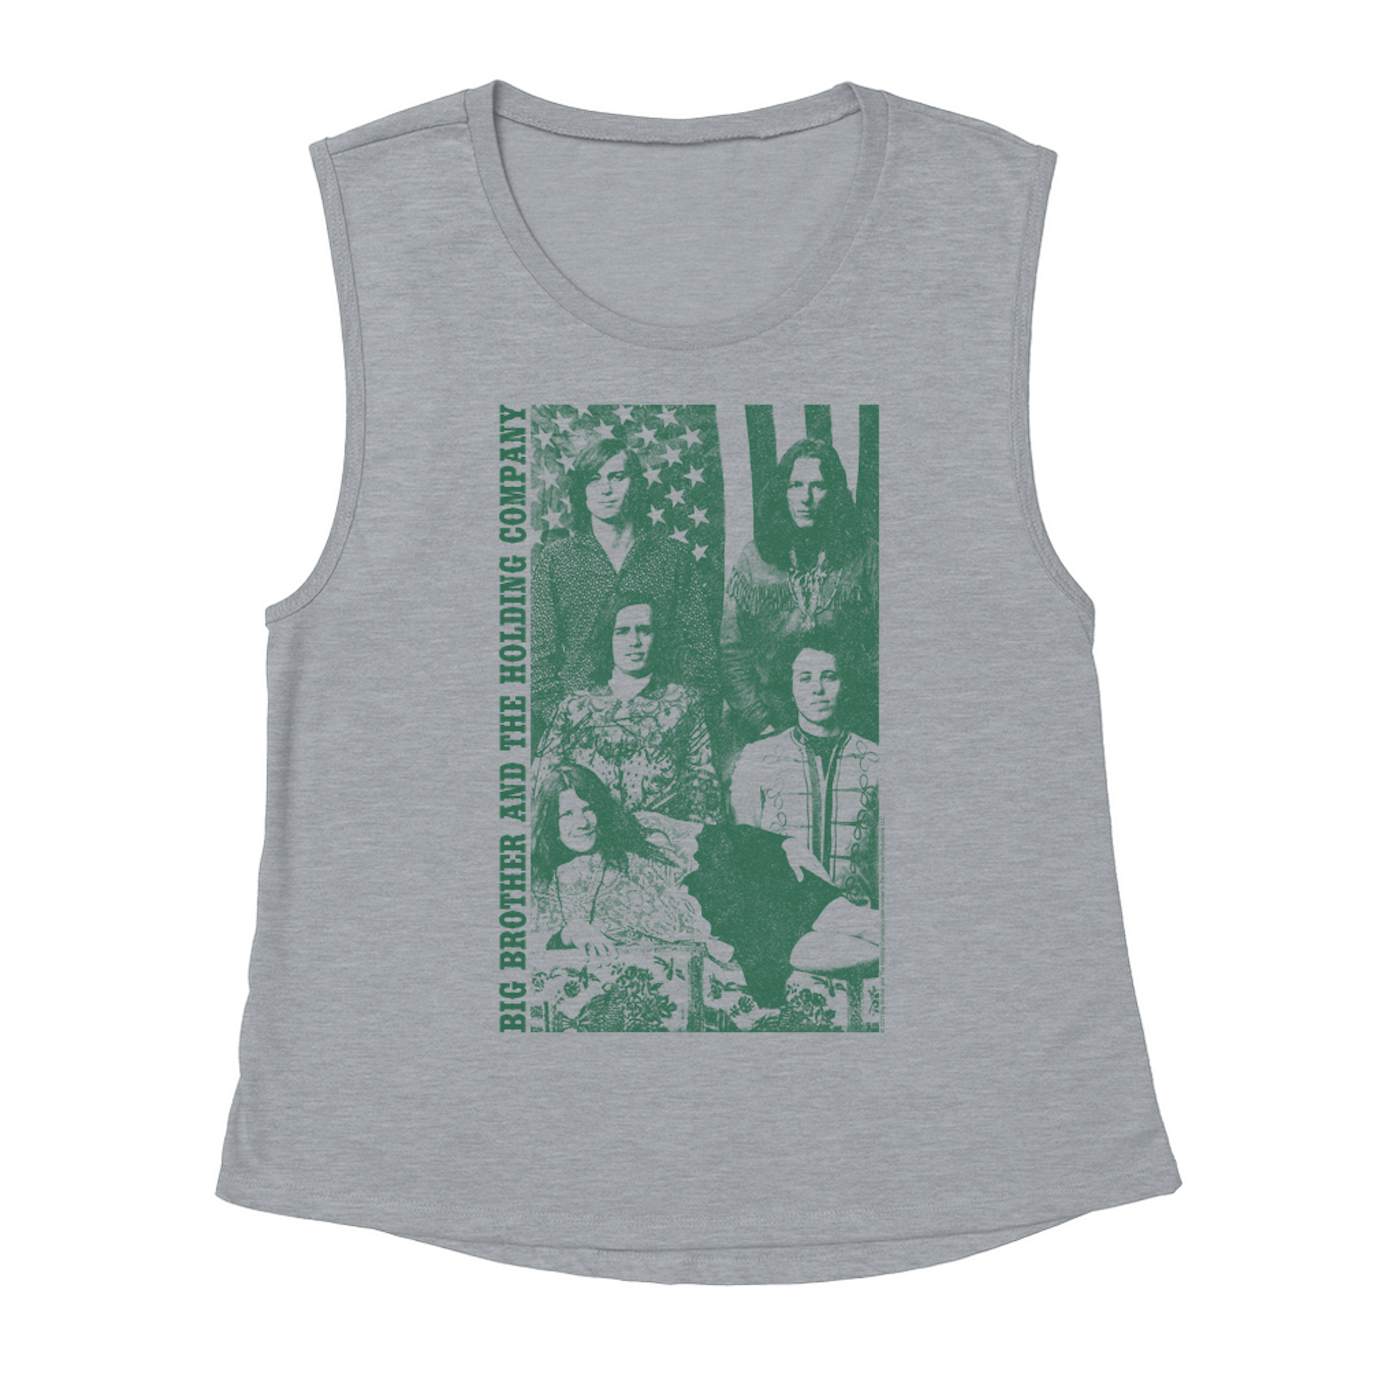 Big Brother & The Holding Company Big Brother and The Holding Co. Ladies' Muscle Tank Top | Featuring Janis Joplin Group Flag Photo Big Brother and The Holding Co. Shirt (Merchbar Exclusive)